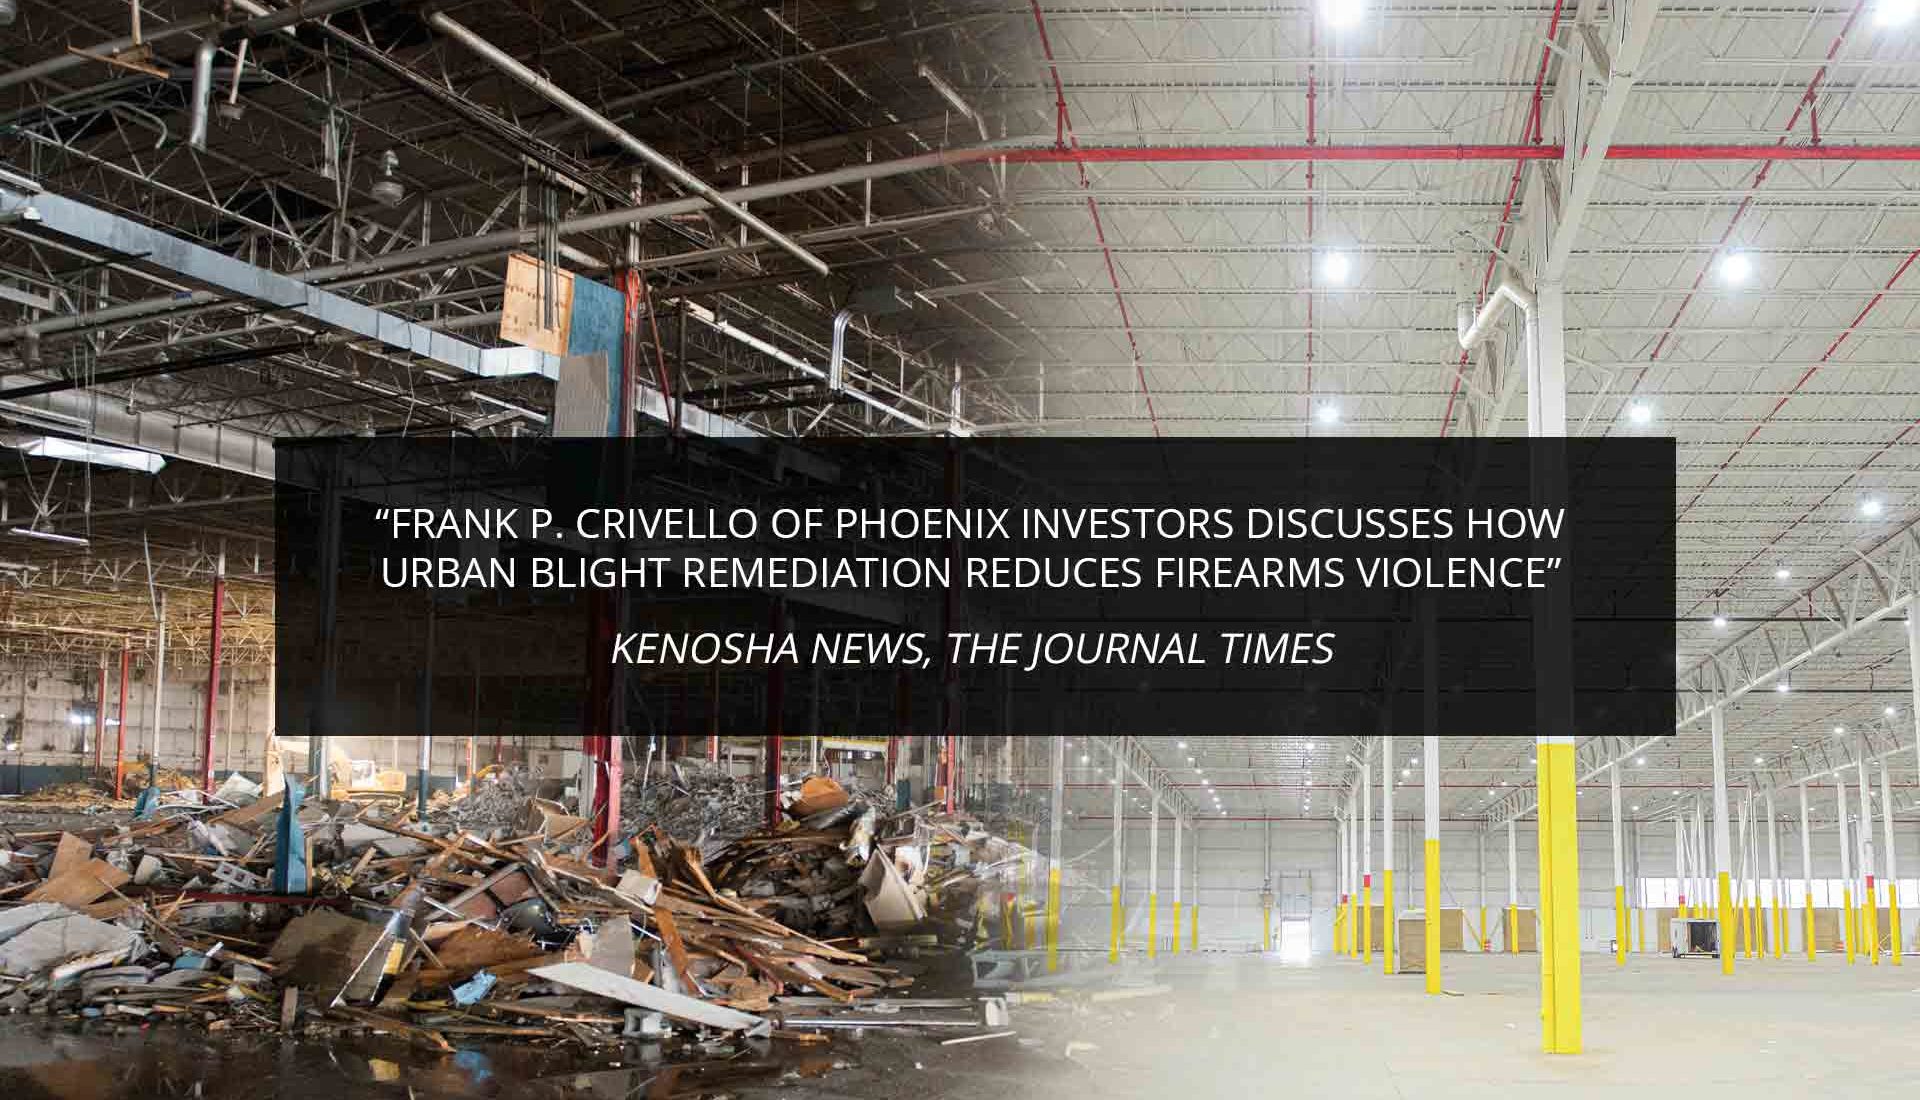 Frank P. Crivello of Phoenix Investors Discusses How Urban Blight Remediation Reduces Firearms Violence